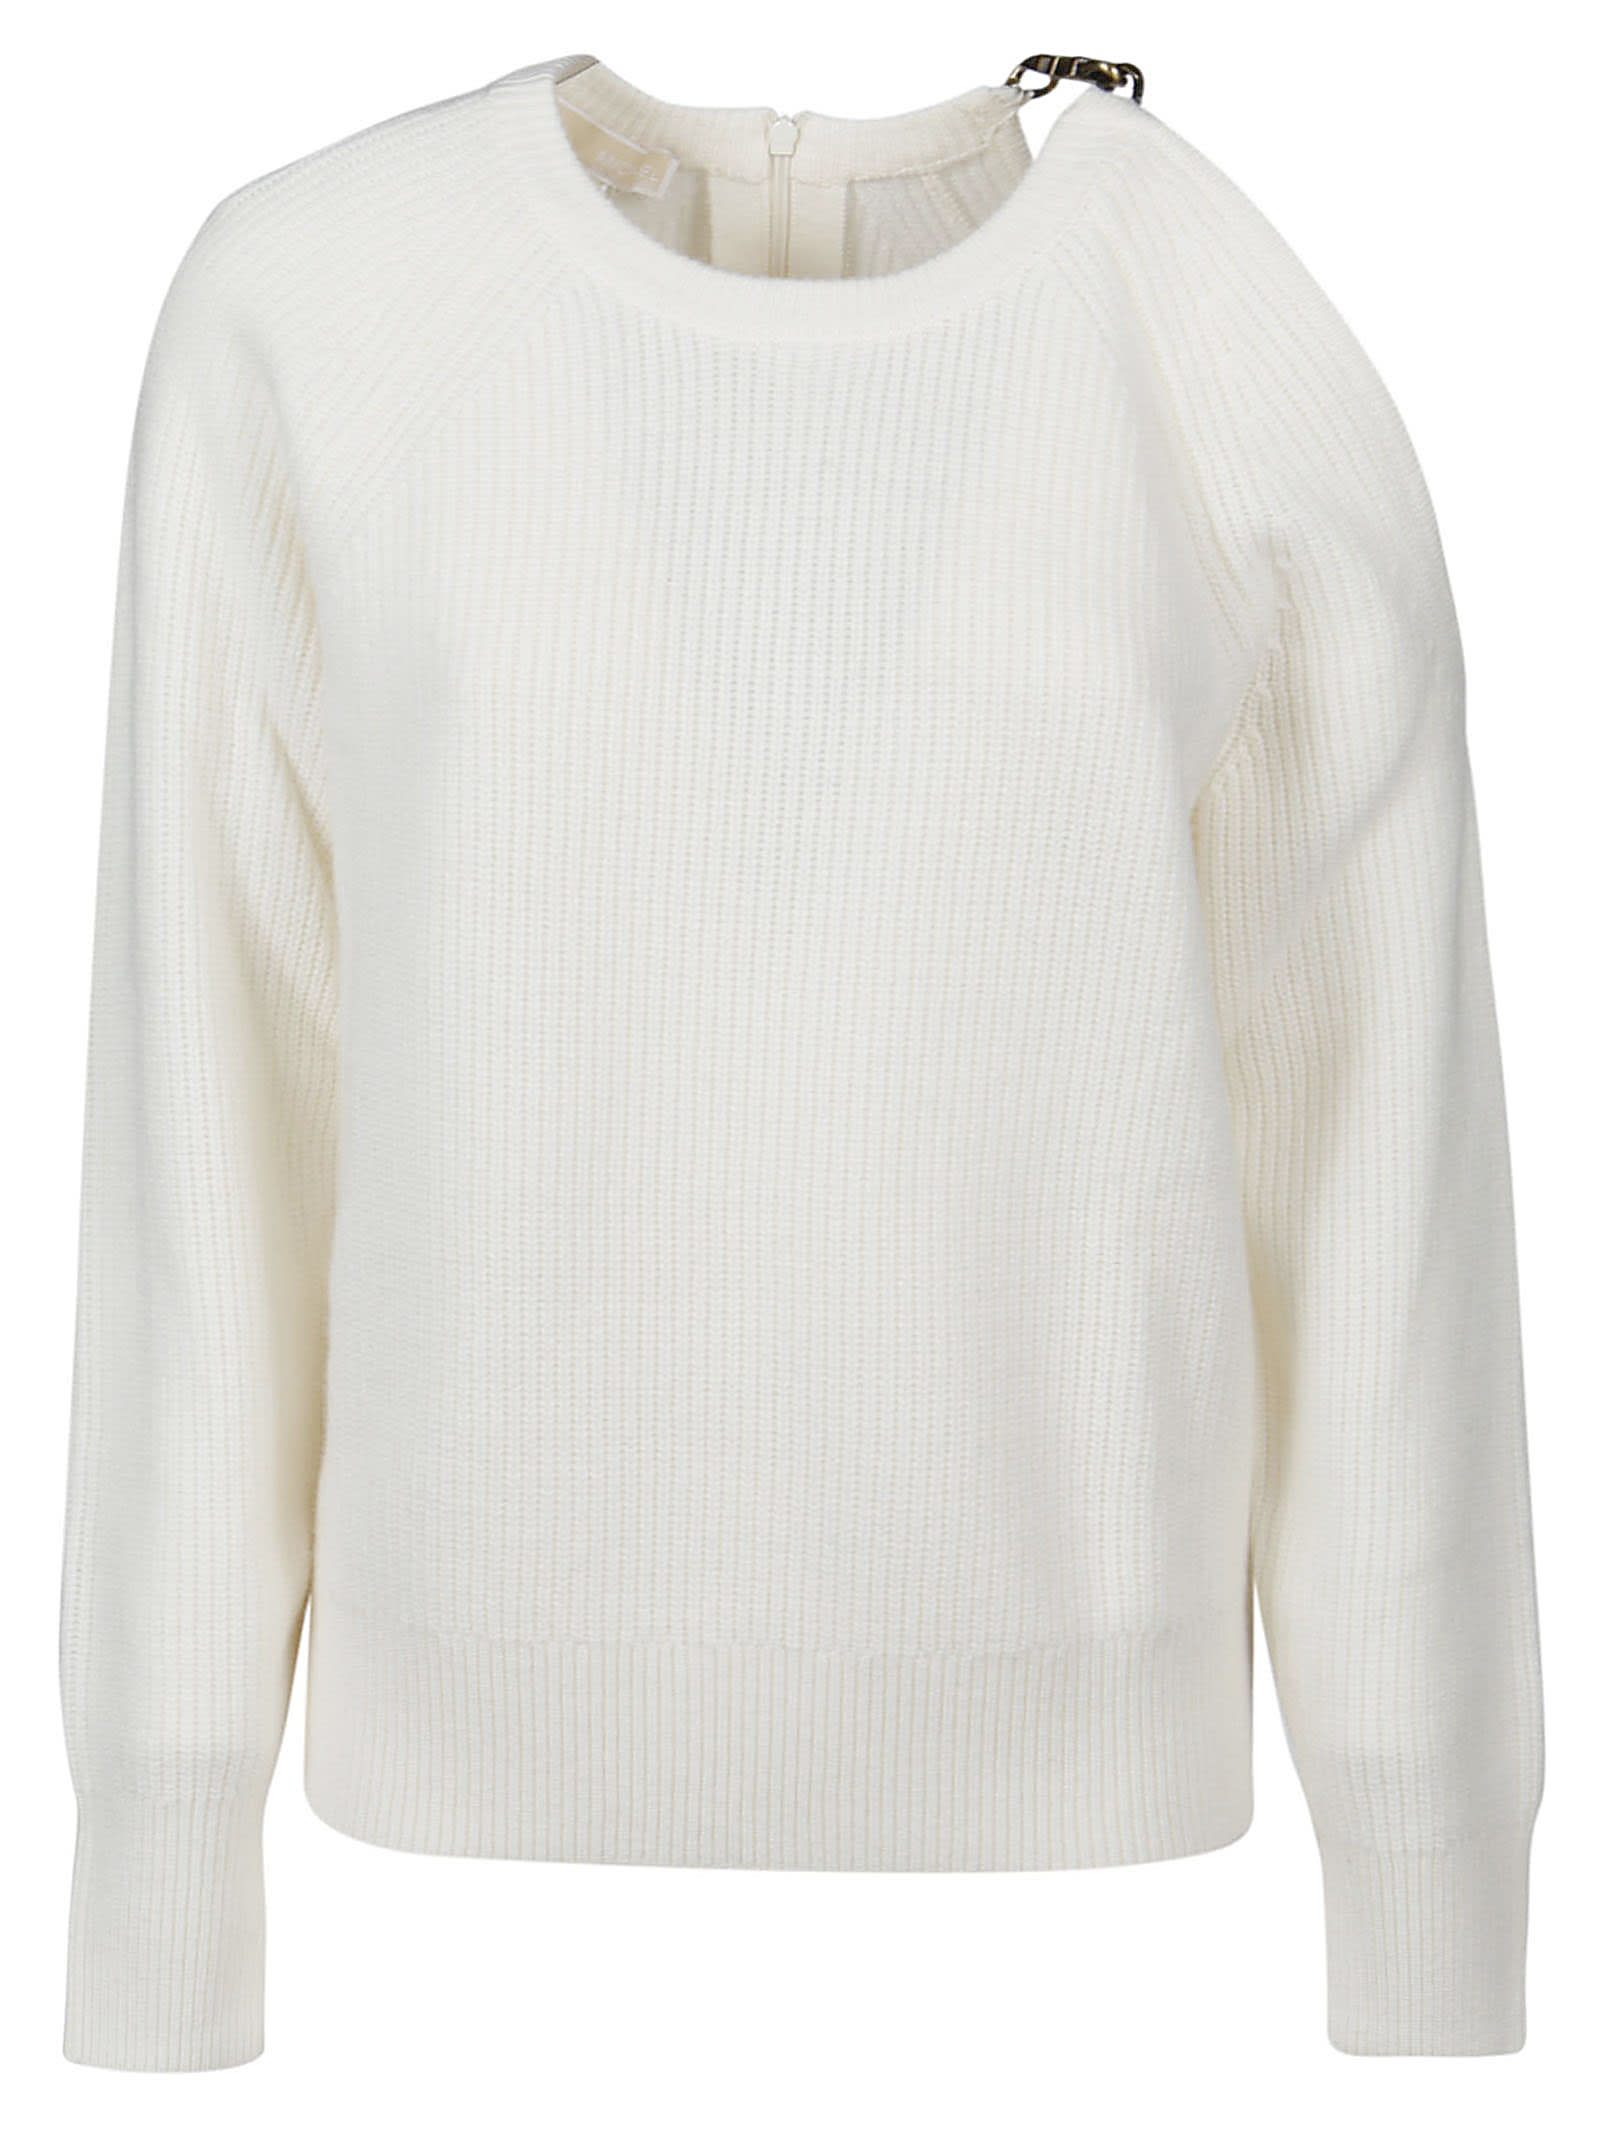 Michael Kors One Shoulder Cut-out Sweater